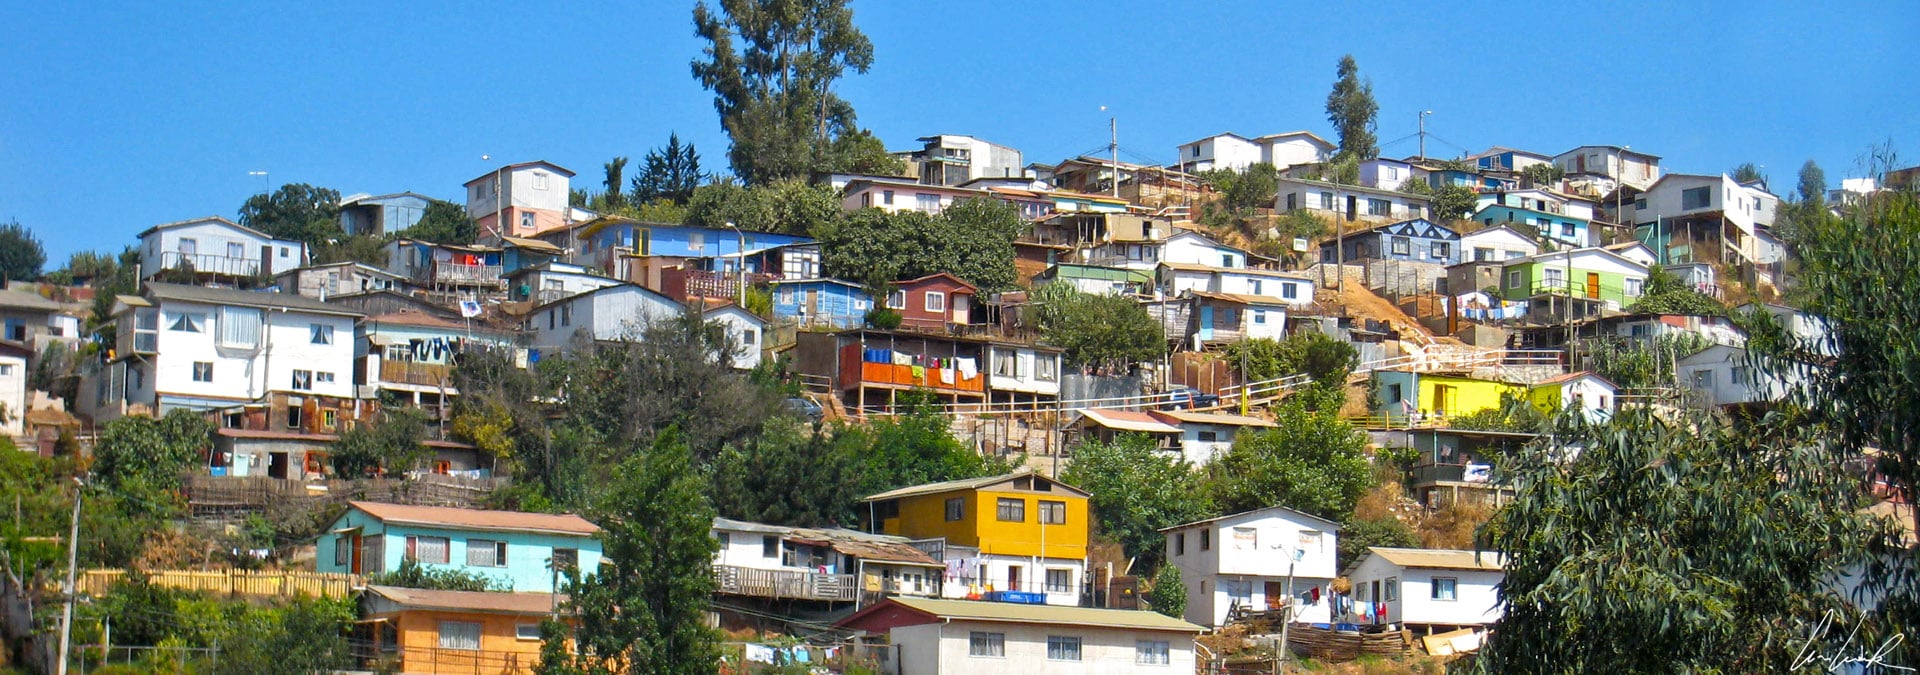 A visit to Valparaiso, the Chile’s Colorful Coastal City